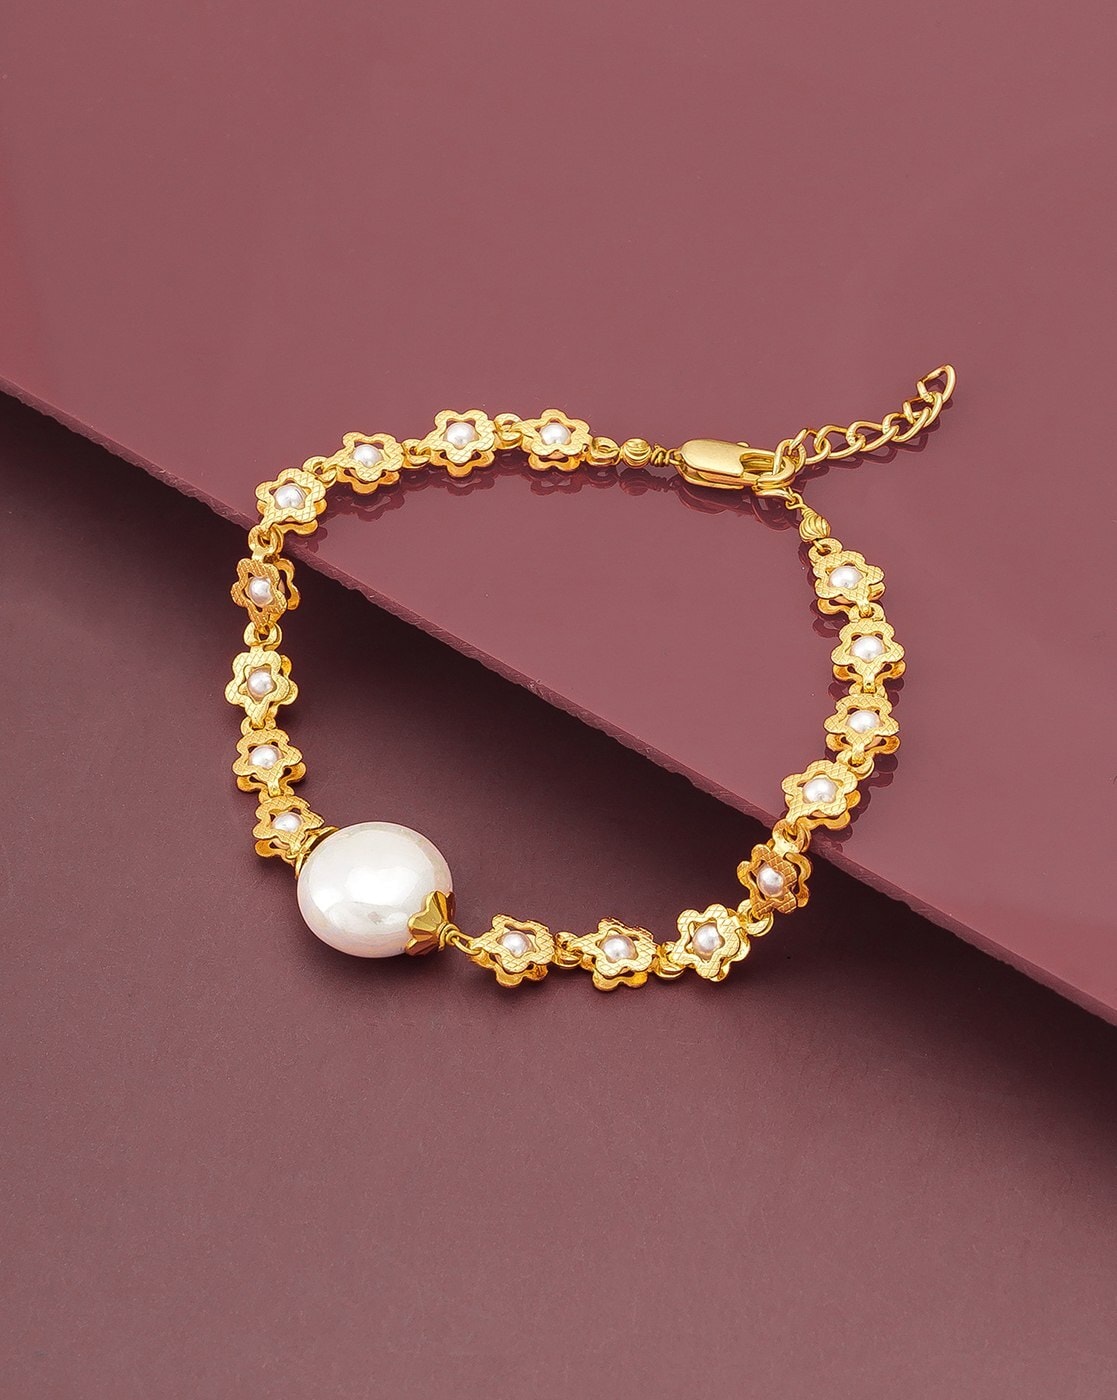 Natural Baroque Freshwater Pearl 14K Gold Filled Elegant Ladies Bracelet  Promotion Jewelry For Women Christmas Gift Cheap